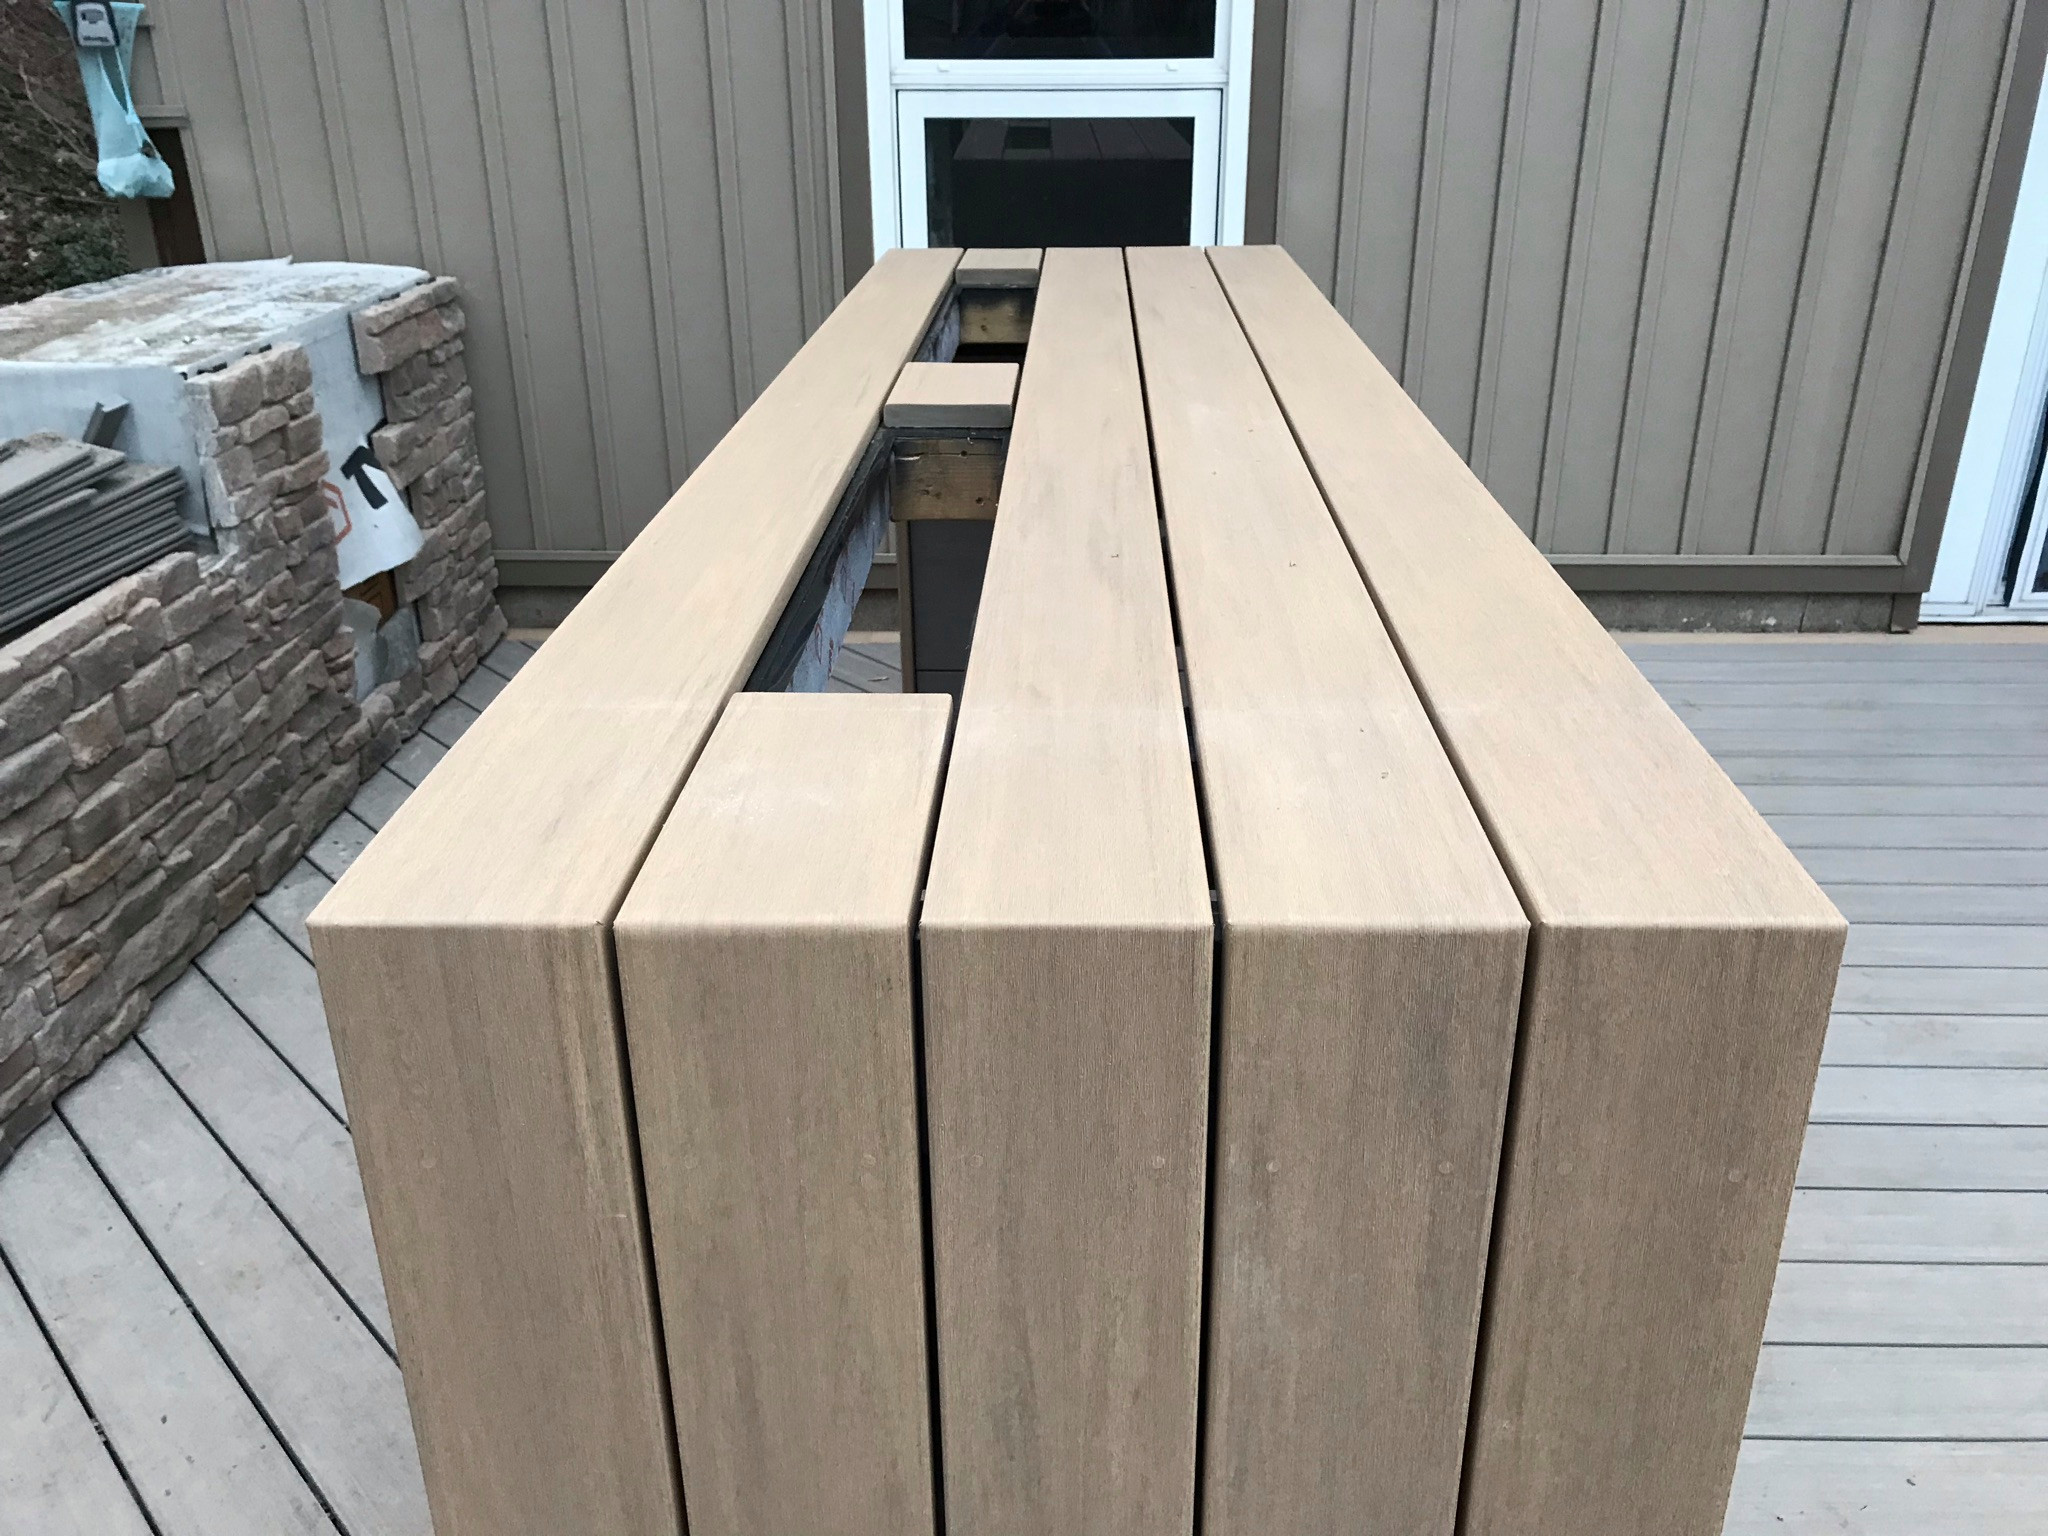 Two Teir Deck with bar and outdoor kitchen